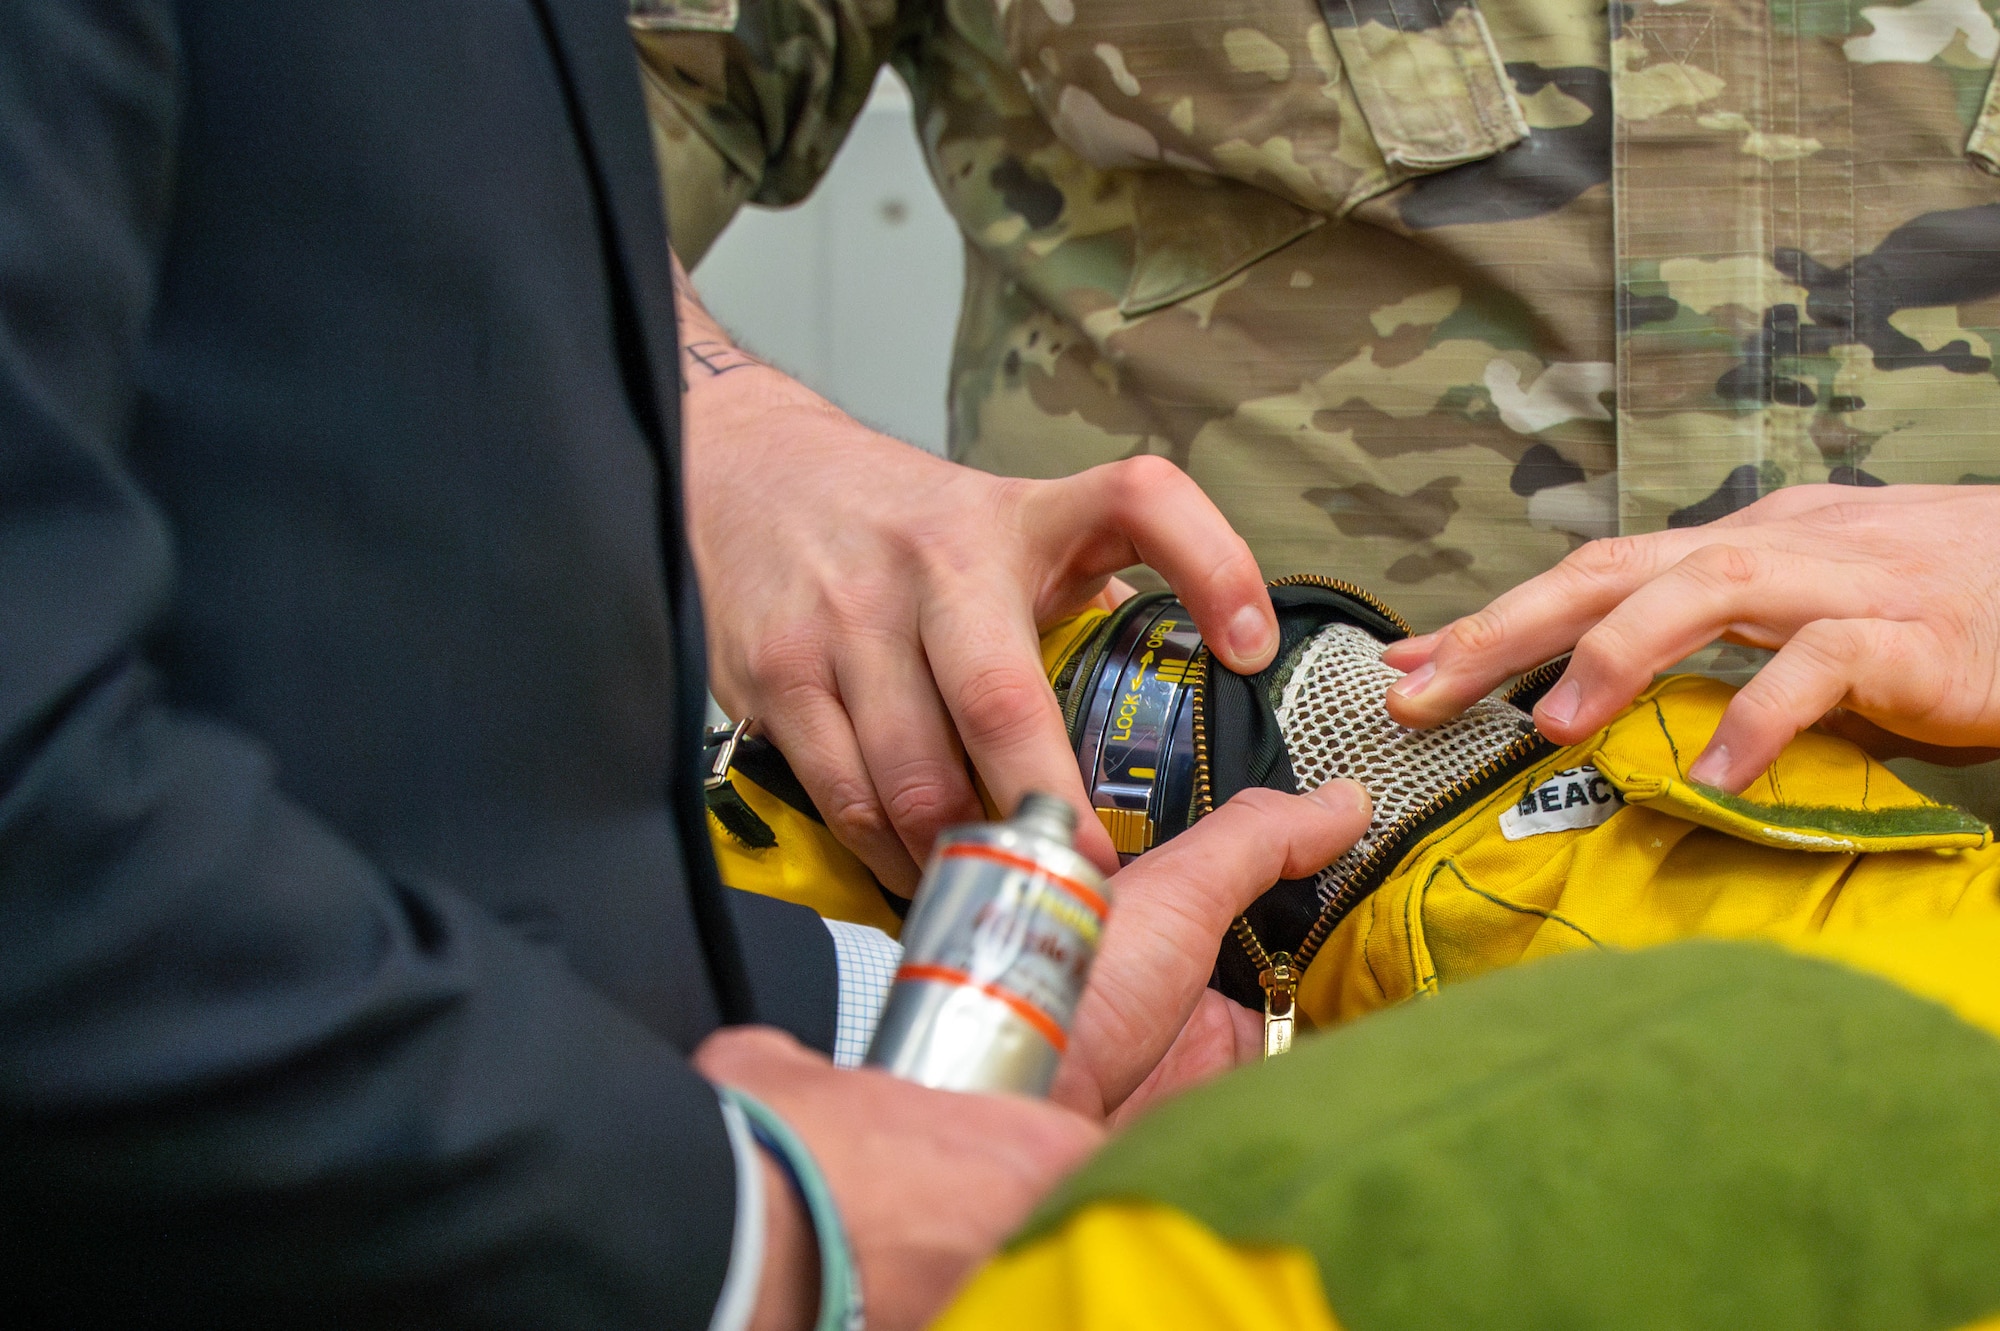 Hands touch and inspect the inner mesh lining of a U-2 pilot’s pressure suit